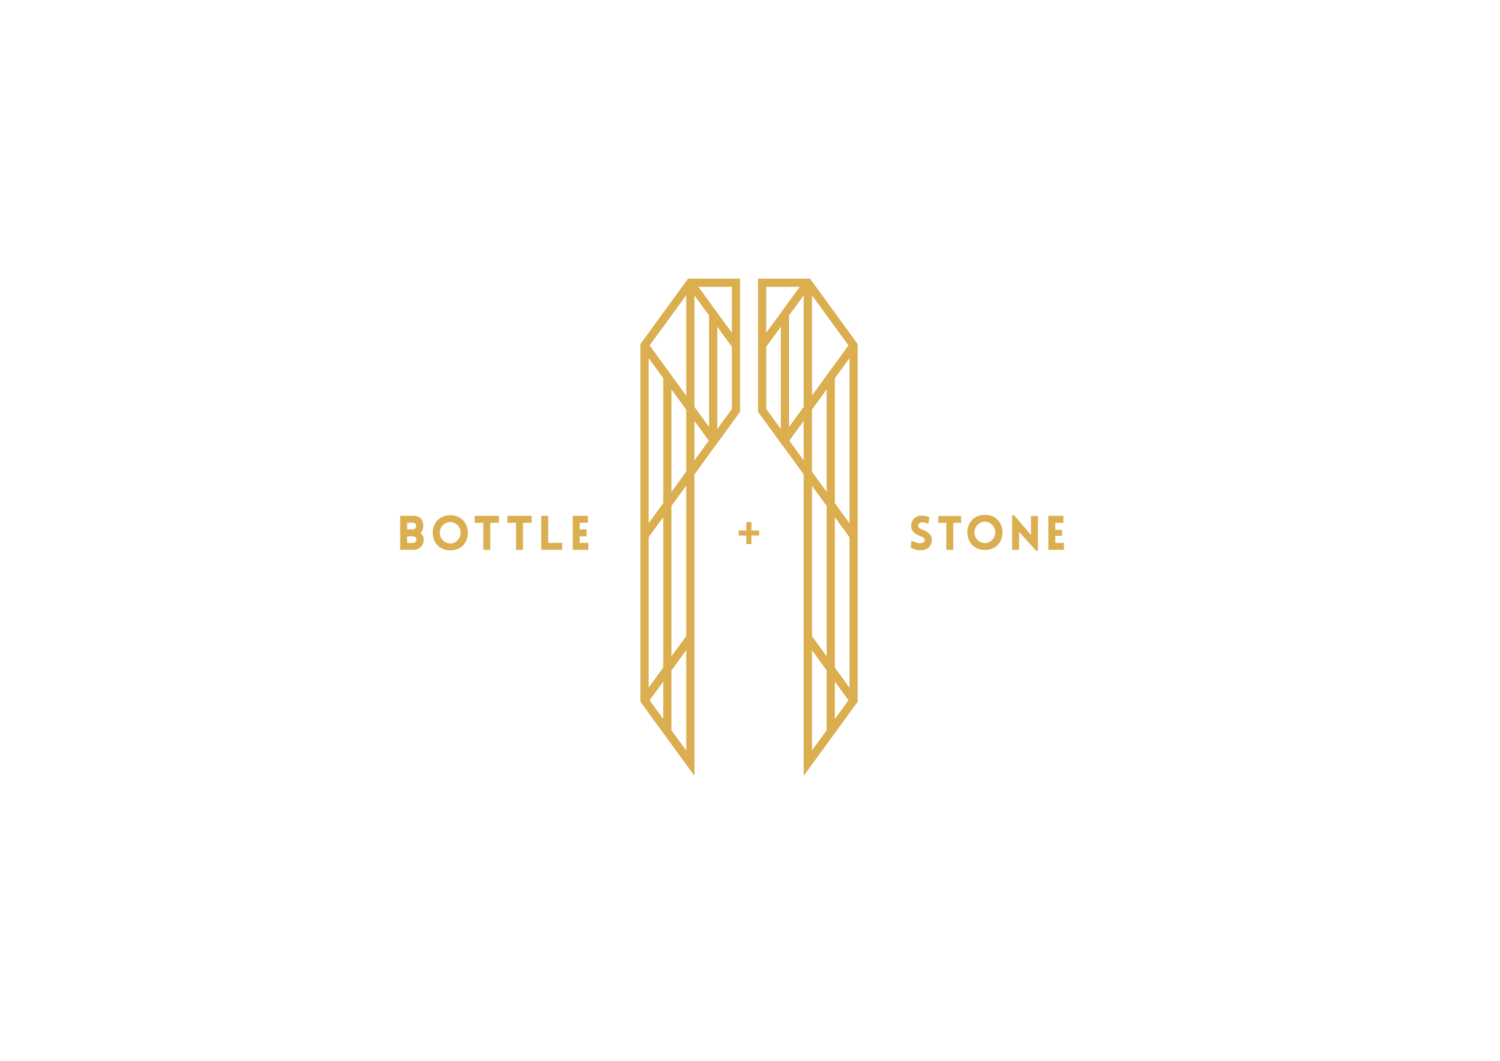 Bottle and Stone